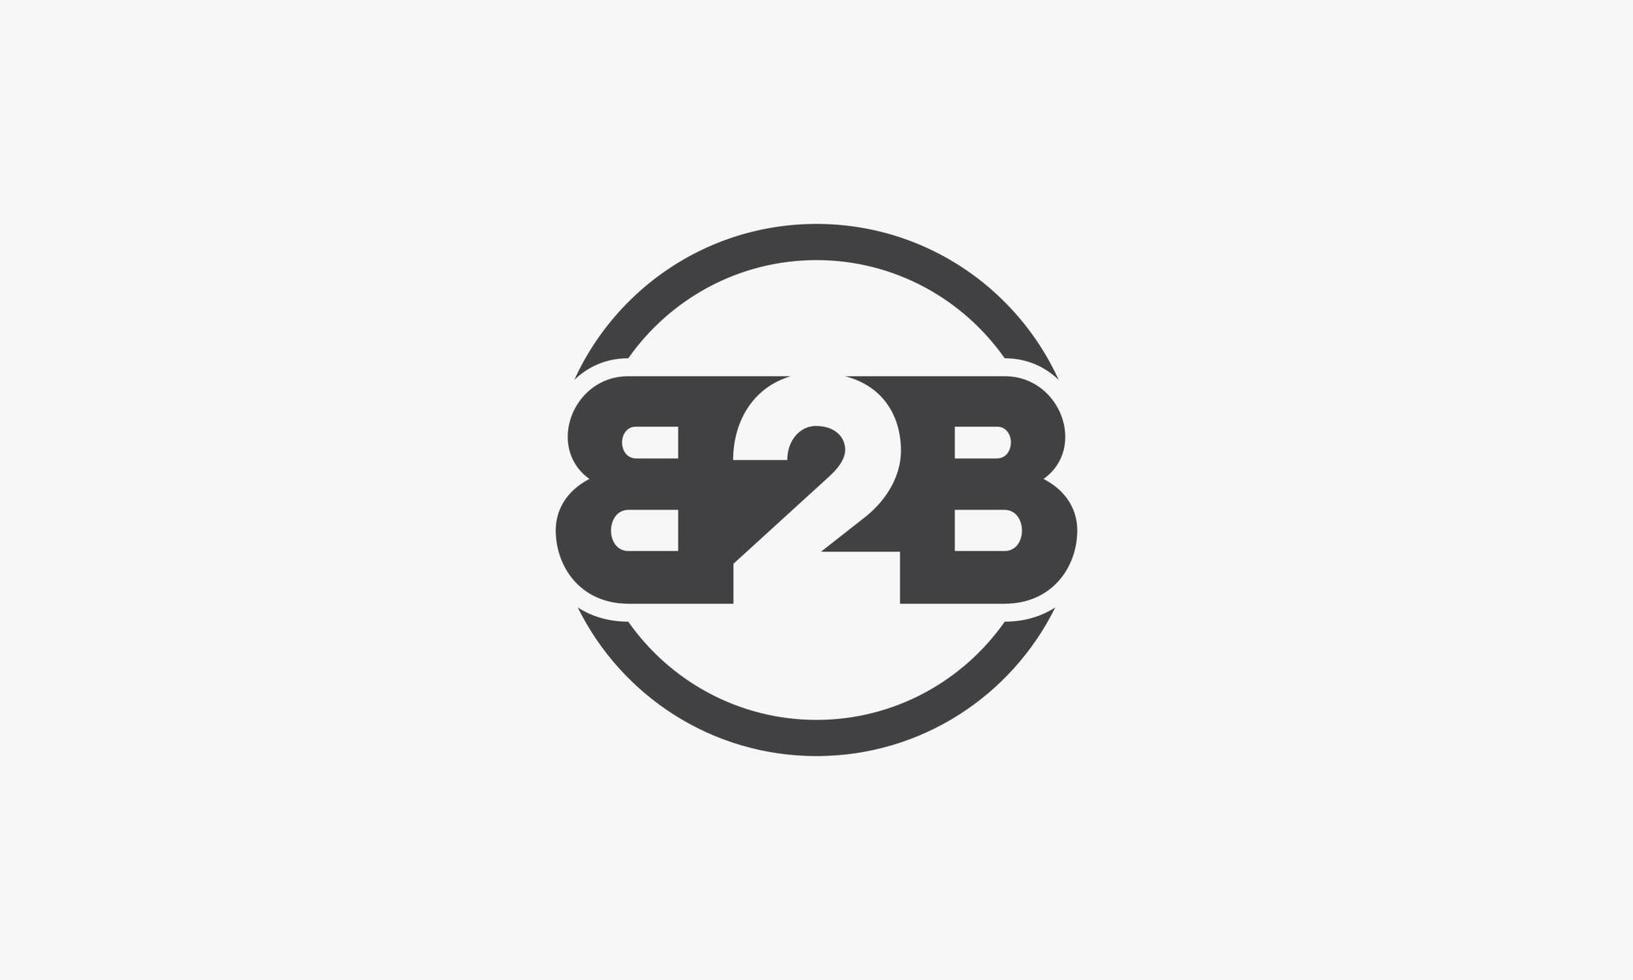 circle B2B letter logo concept isolated on white background. vector